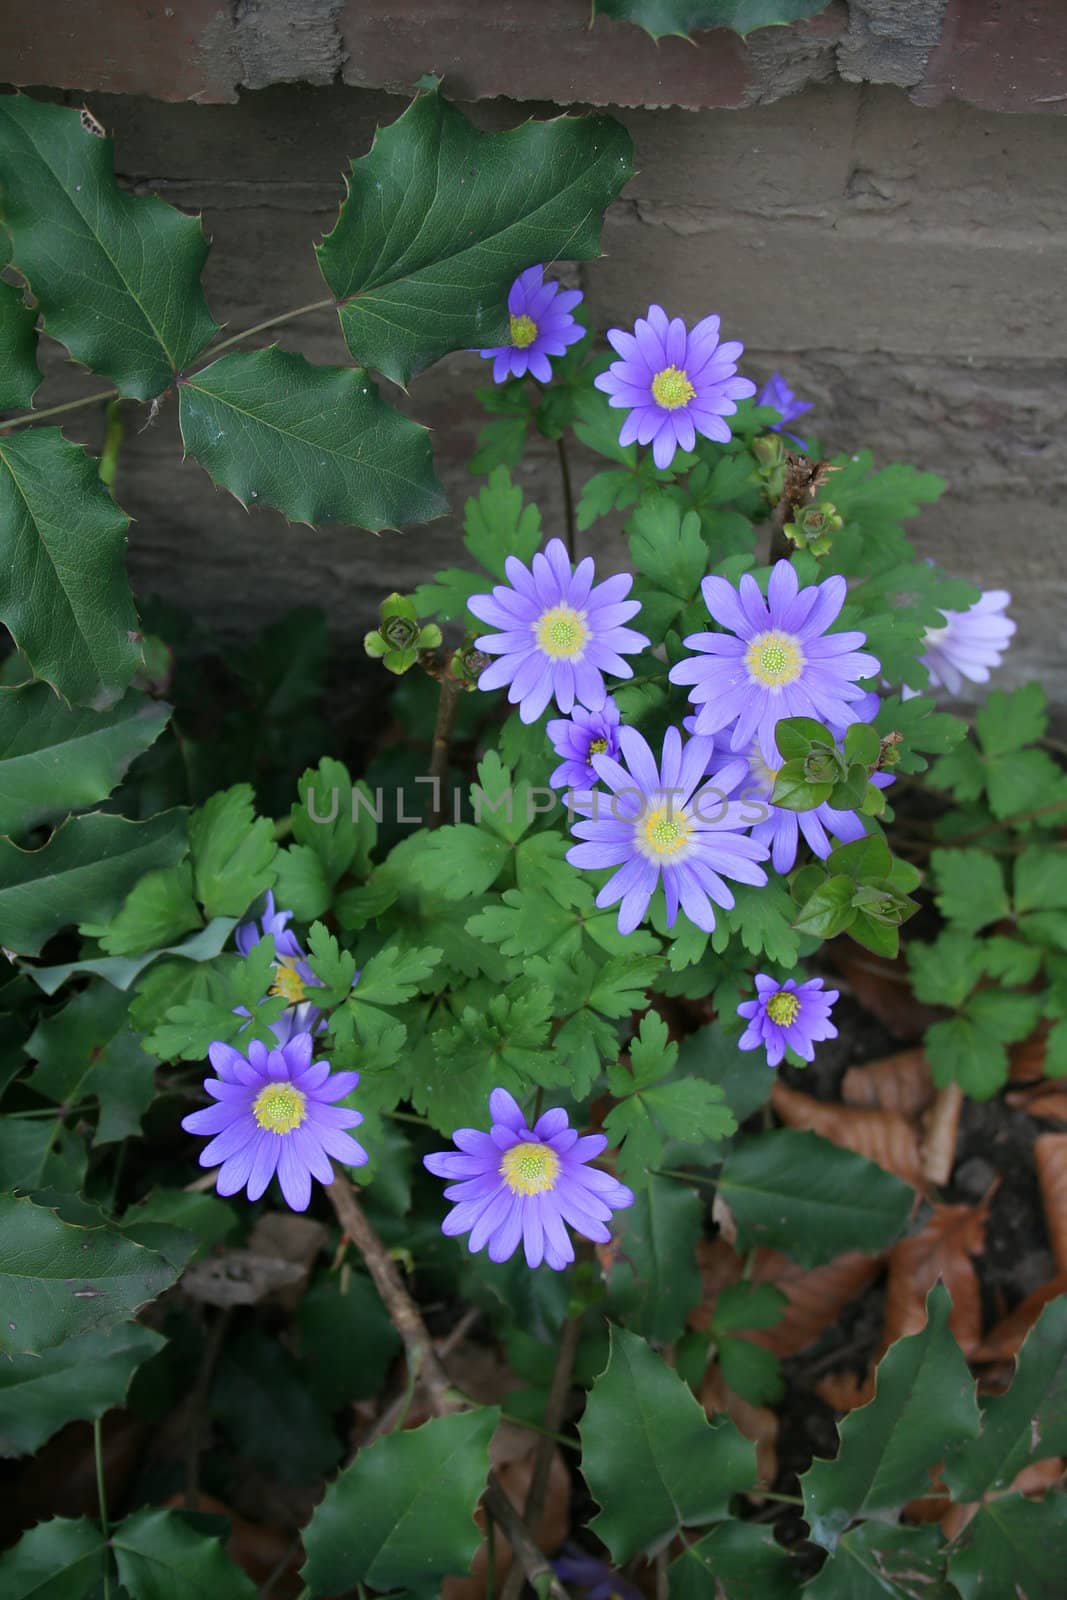 Purple-blueish Anemone Blanda near a wall in a shadowy backyard garden. Northern Germany in April. They grow in nutrient-rich, moist but well-drained soil. Height 10 - 15 cm.